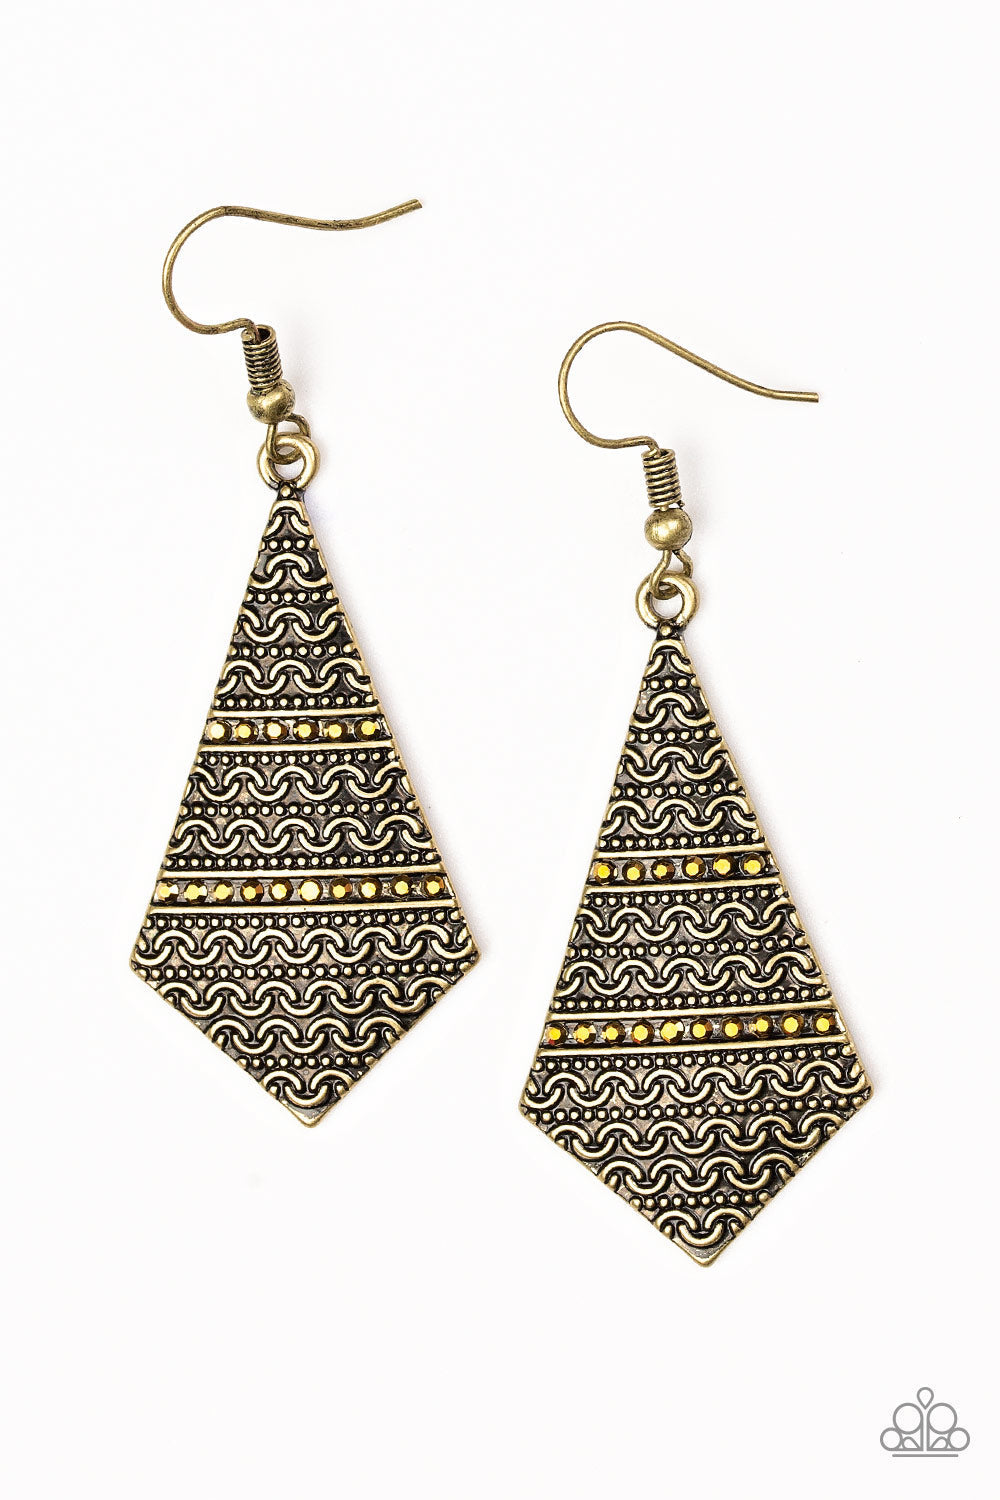 Terra Trending - Brass Fashion Earrings - Paparazzi Accessories - Radiating with tribal inspired patterns, a flared brass frame swings from the ear in an edgy fashion. Rows of dainty aurum rhinestones are pressed into the lure for a shimmery finish. Earring attaches to a standard fishhook fitting.